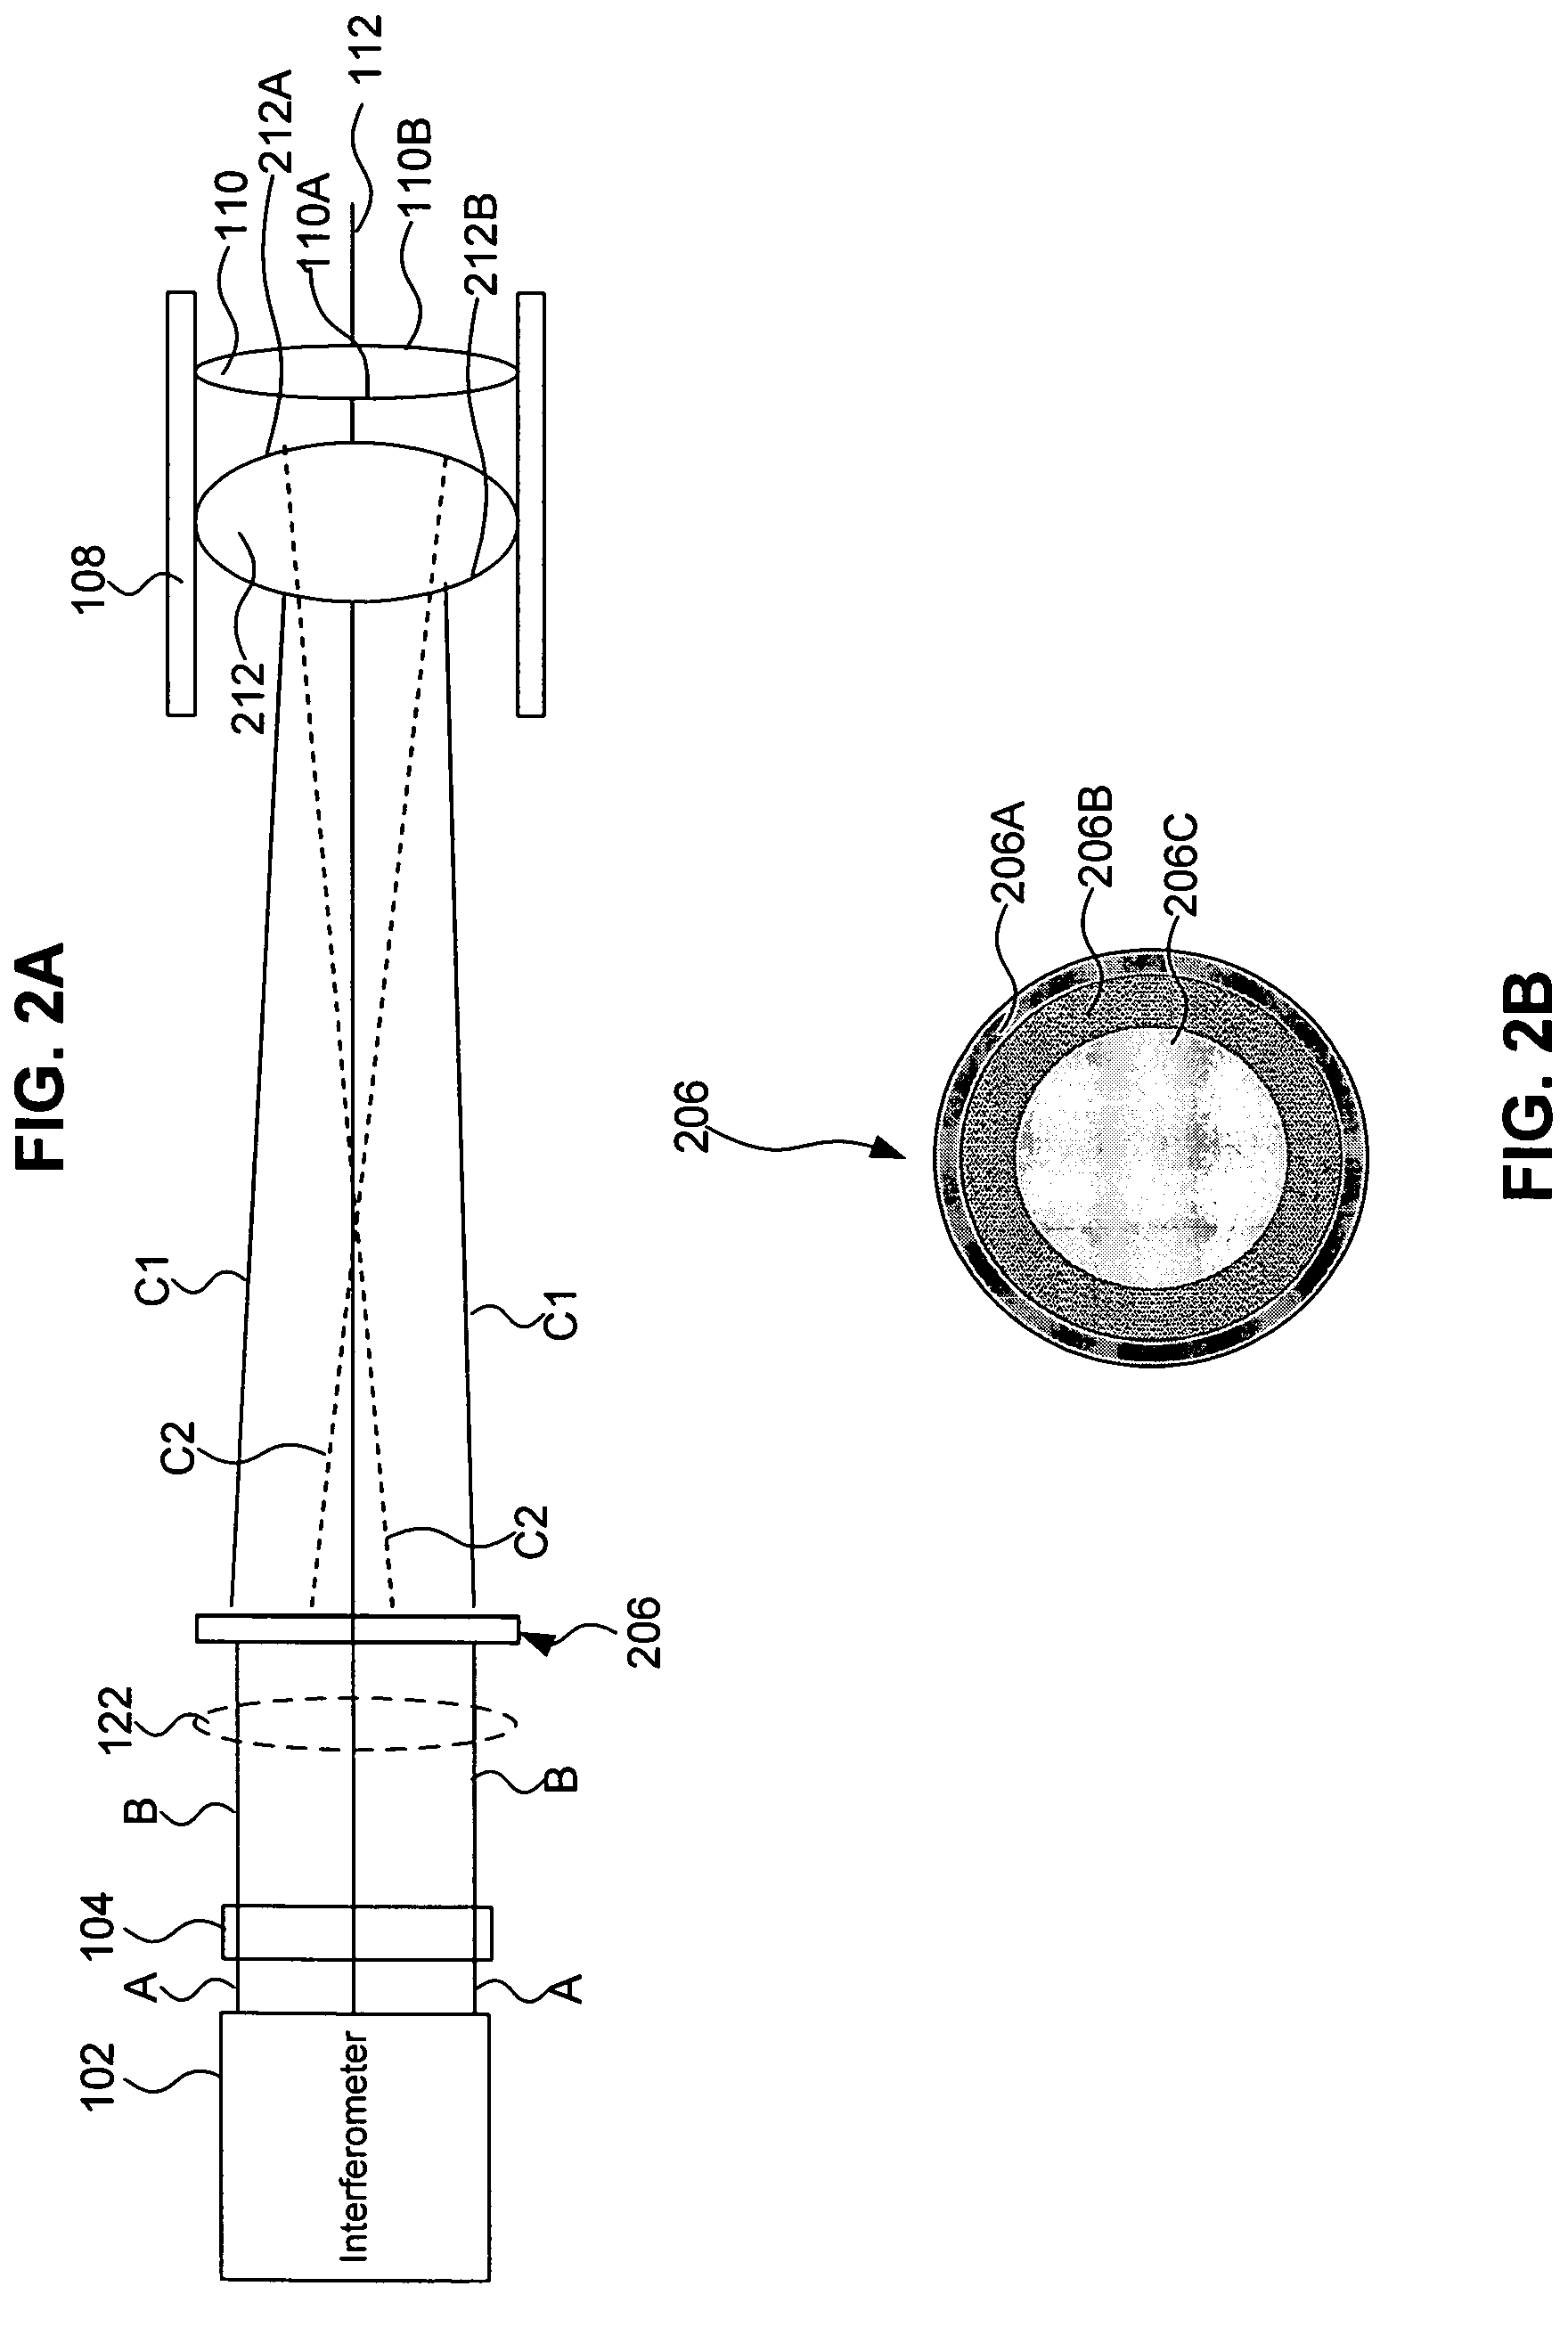 Optical system alignment system and method with high accuracy and simple operation